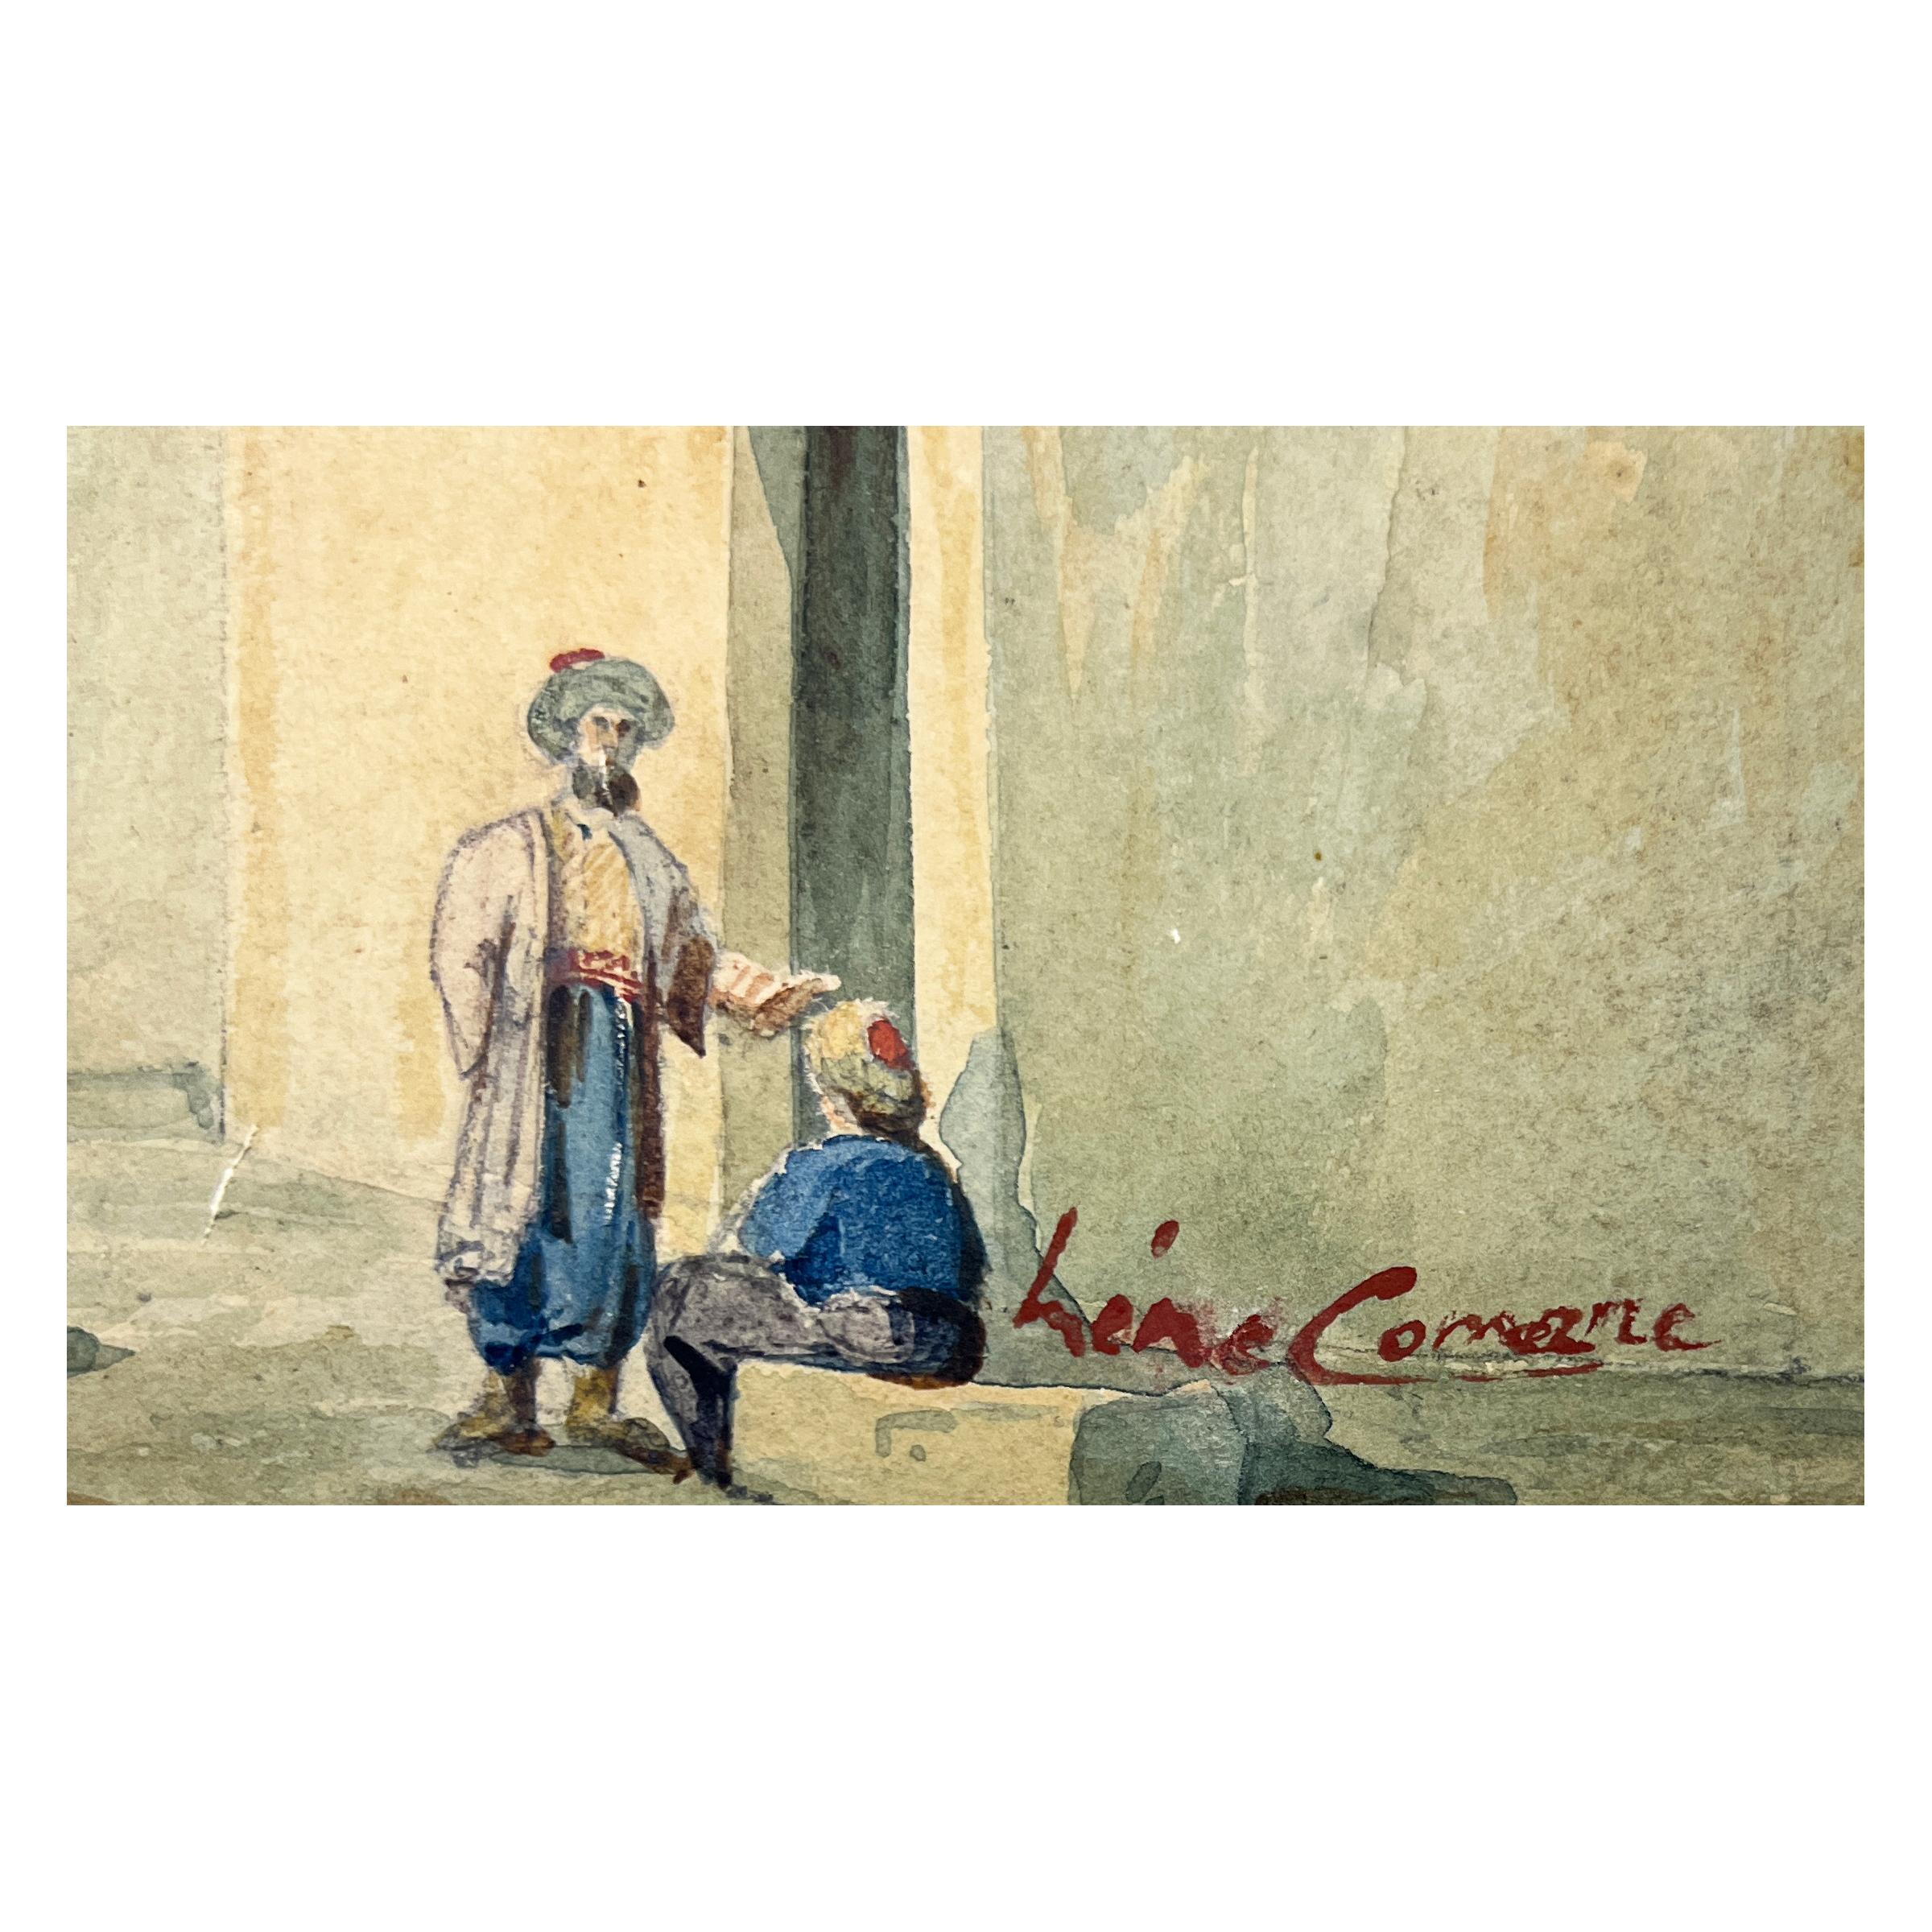 European Orientalist Watercolour Painting Depicts North African Street